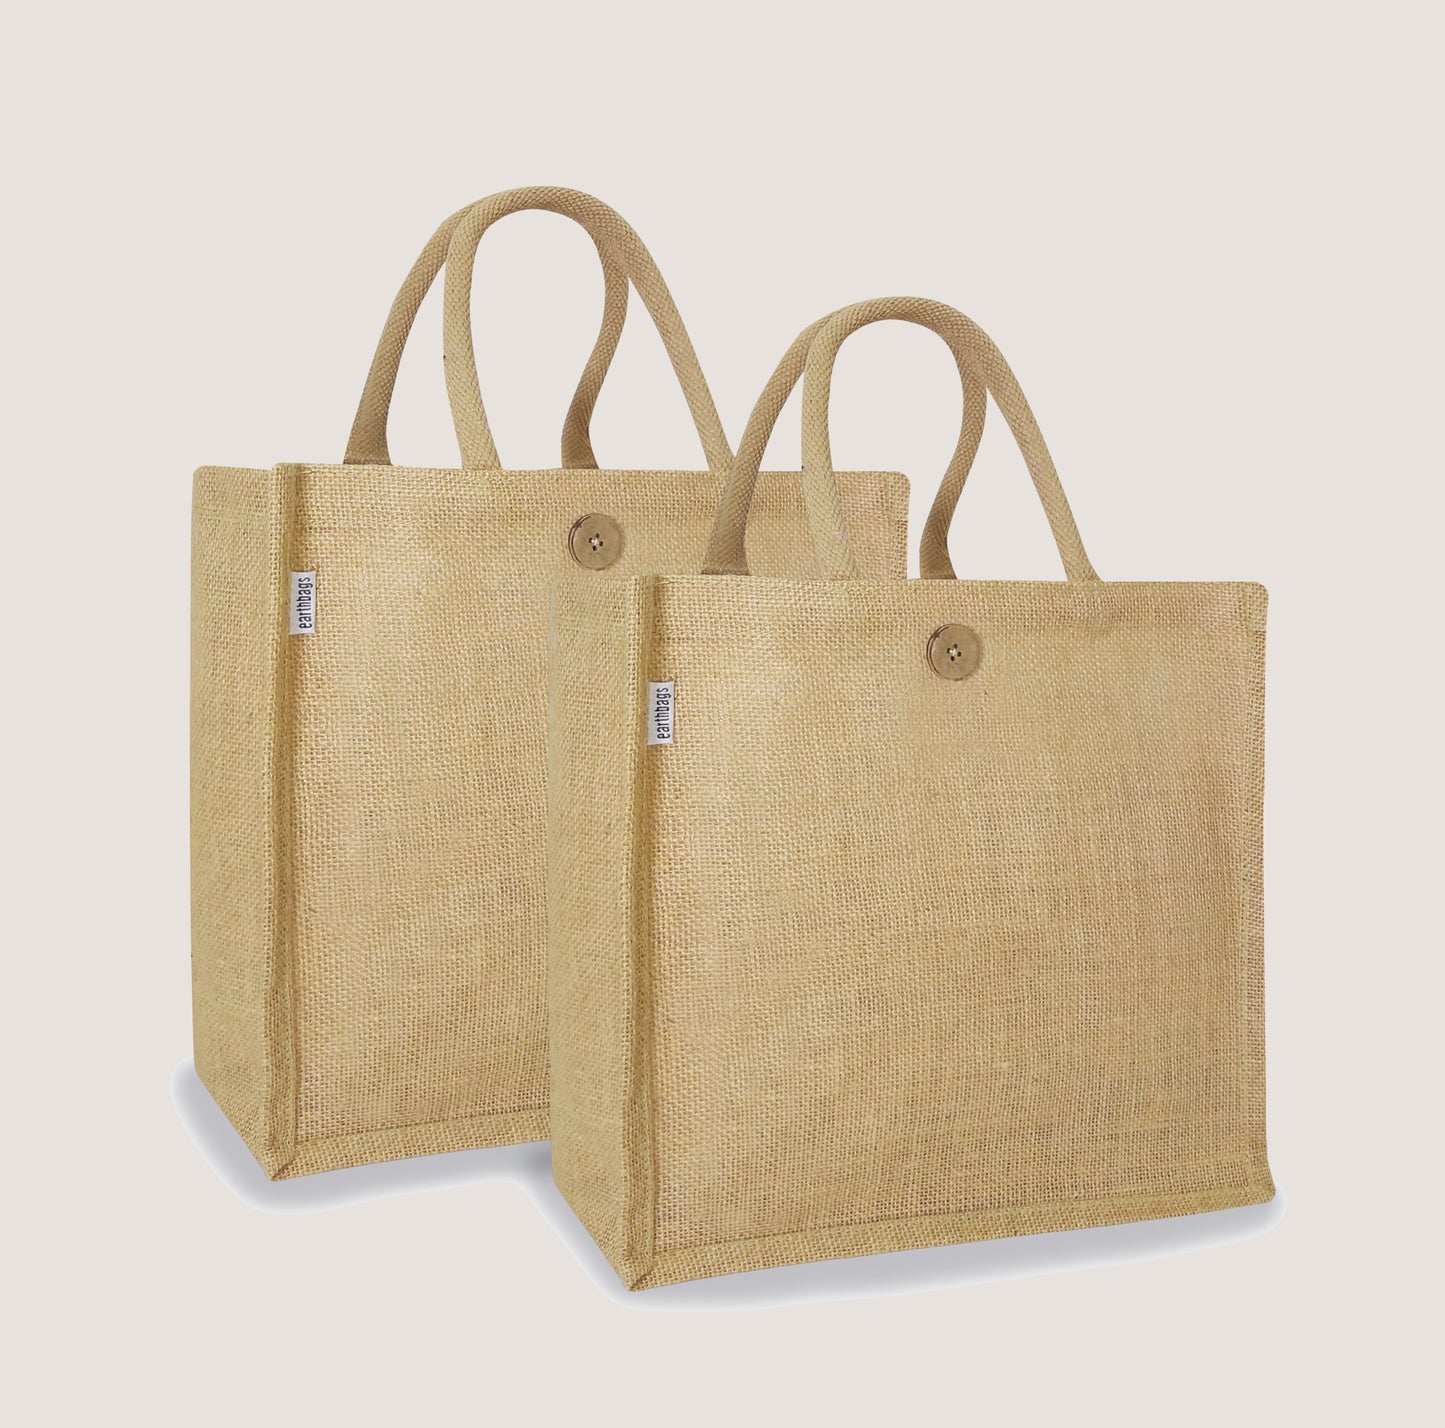 EARTHBAGS SOLID COLOR BAGS WITH LOOP CLOSURE-PACK OF 2